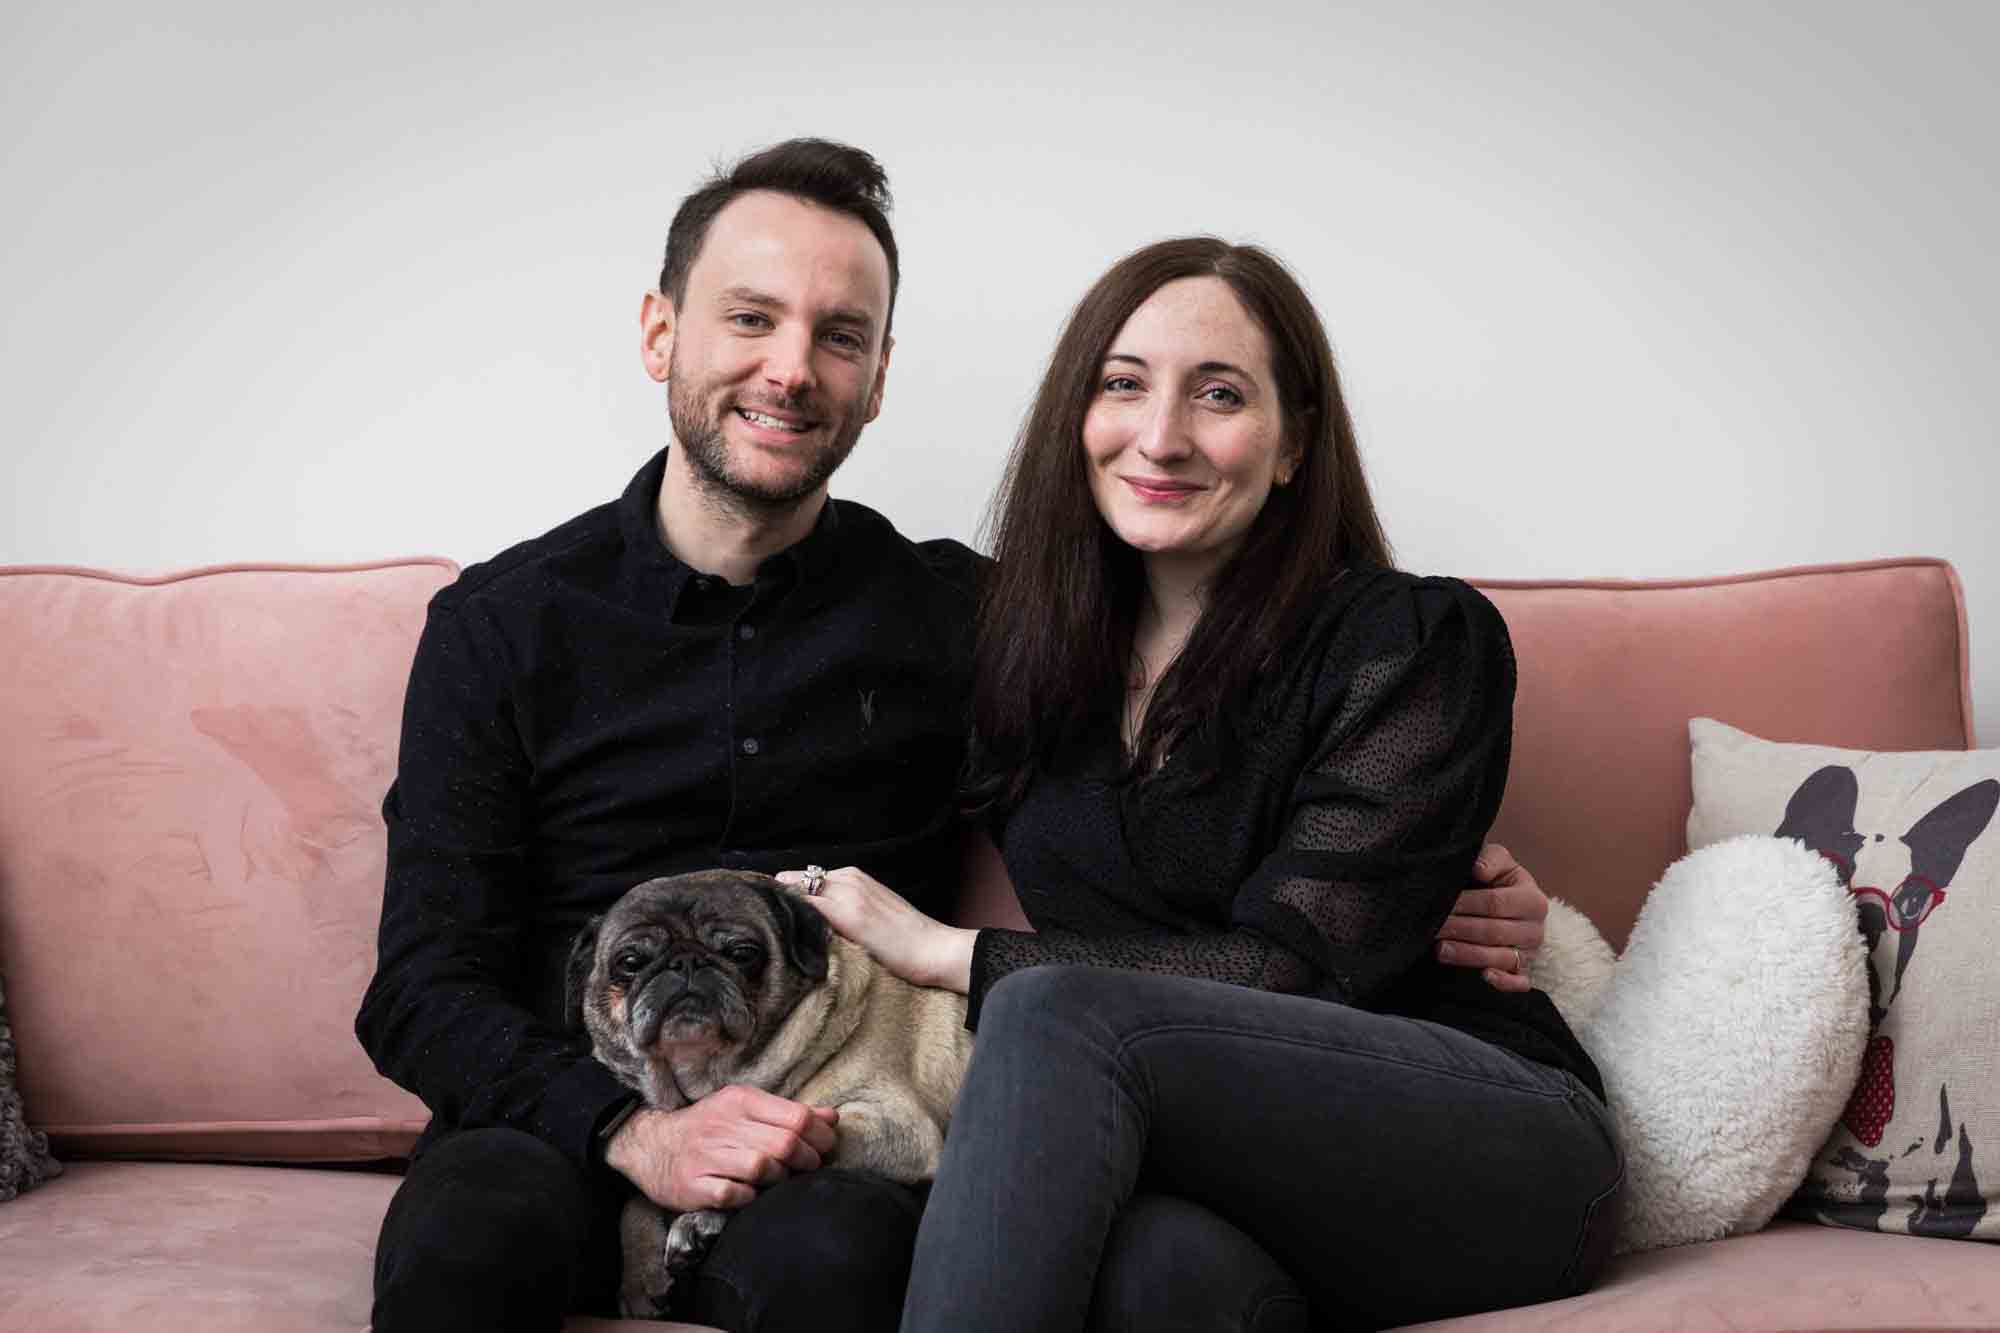 Couple with pug dog sitting on pink couch